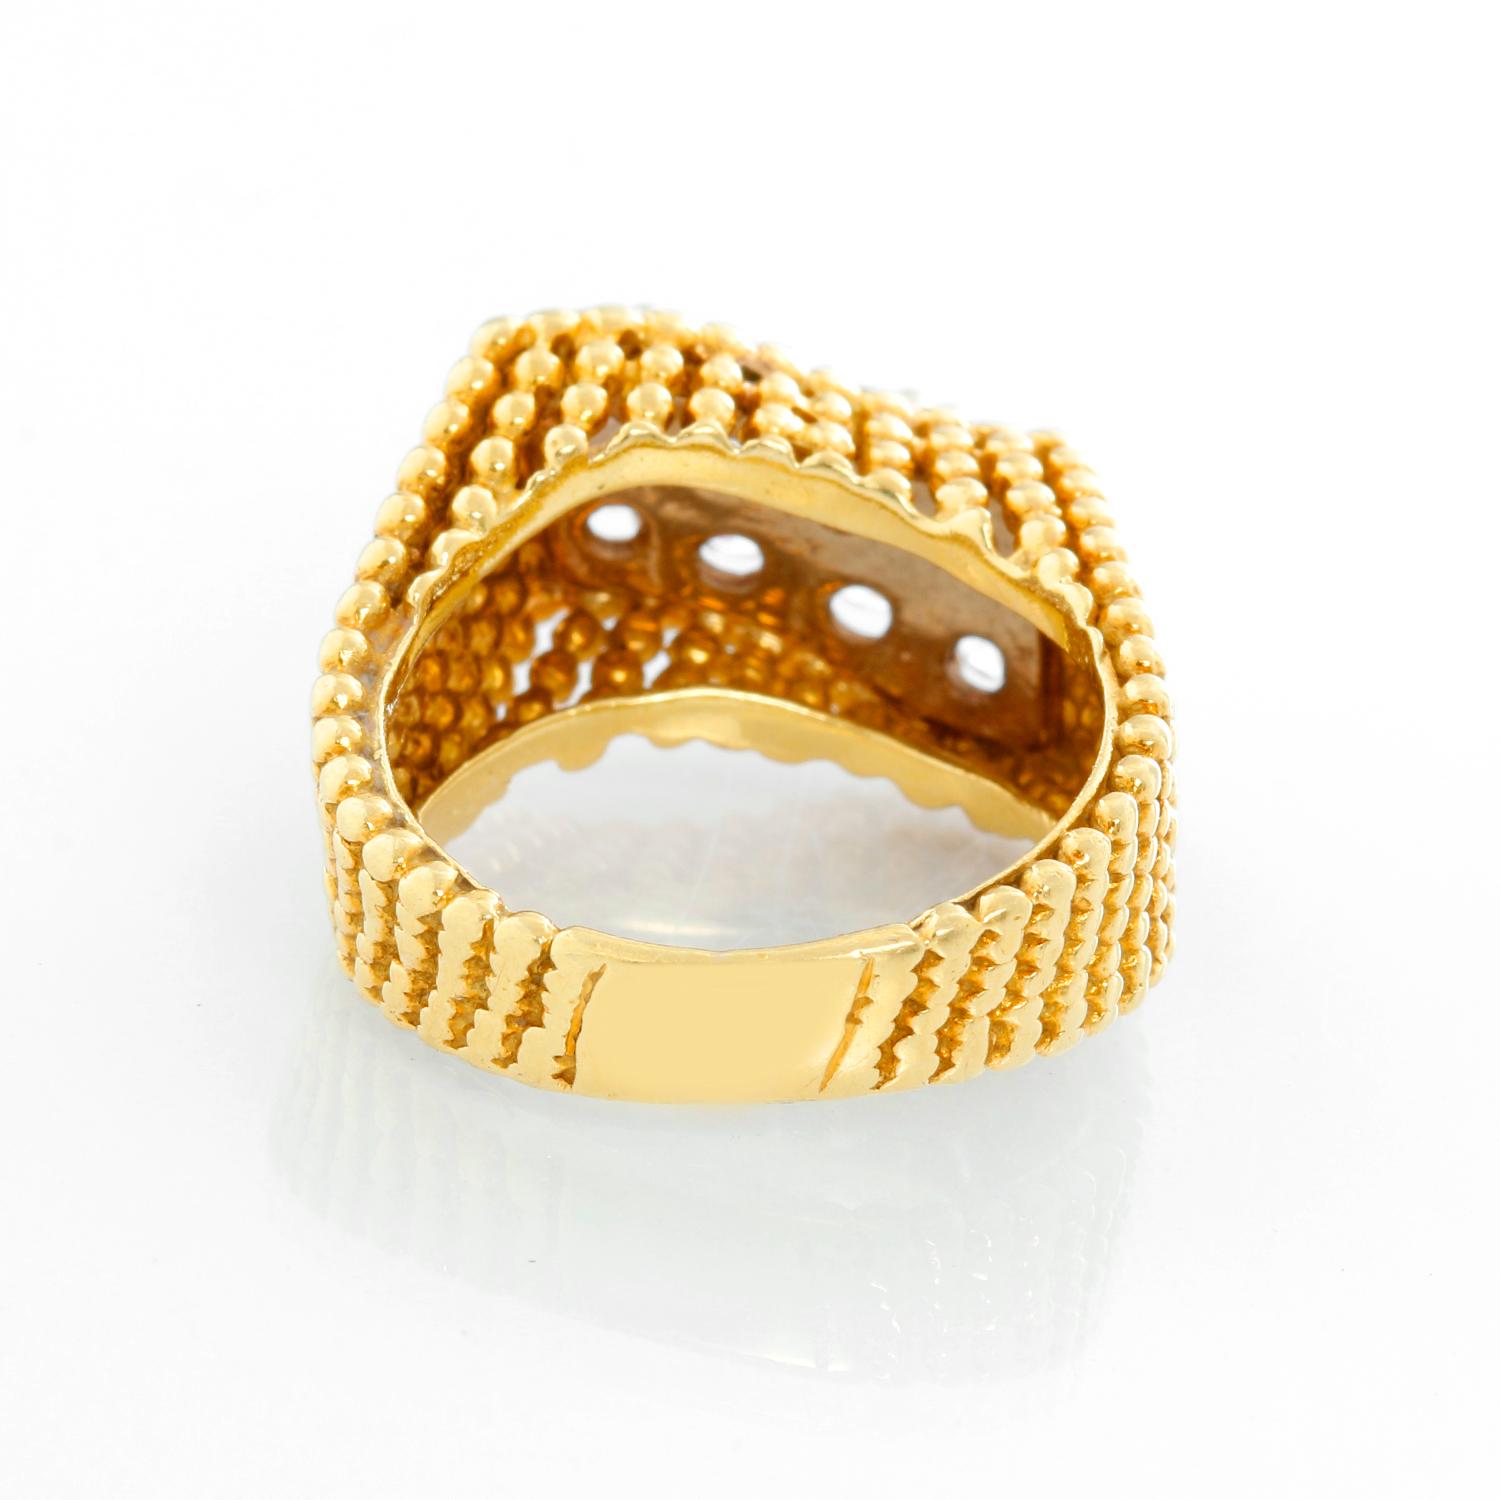 This is an 18k yellow gold ring with a beaded texture featuring 8 diamonds. The stones are VS clarity  and F color with a total of 1 carat.  It is a size 6.5 and weighs 8.3 grams. This ring features a fun wave design and is great for everyday.